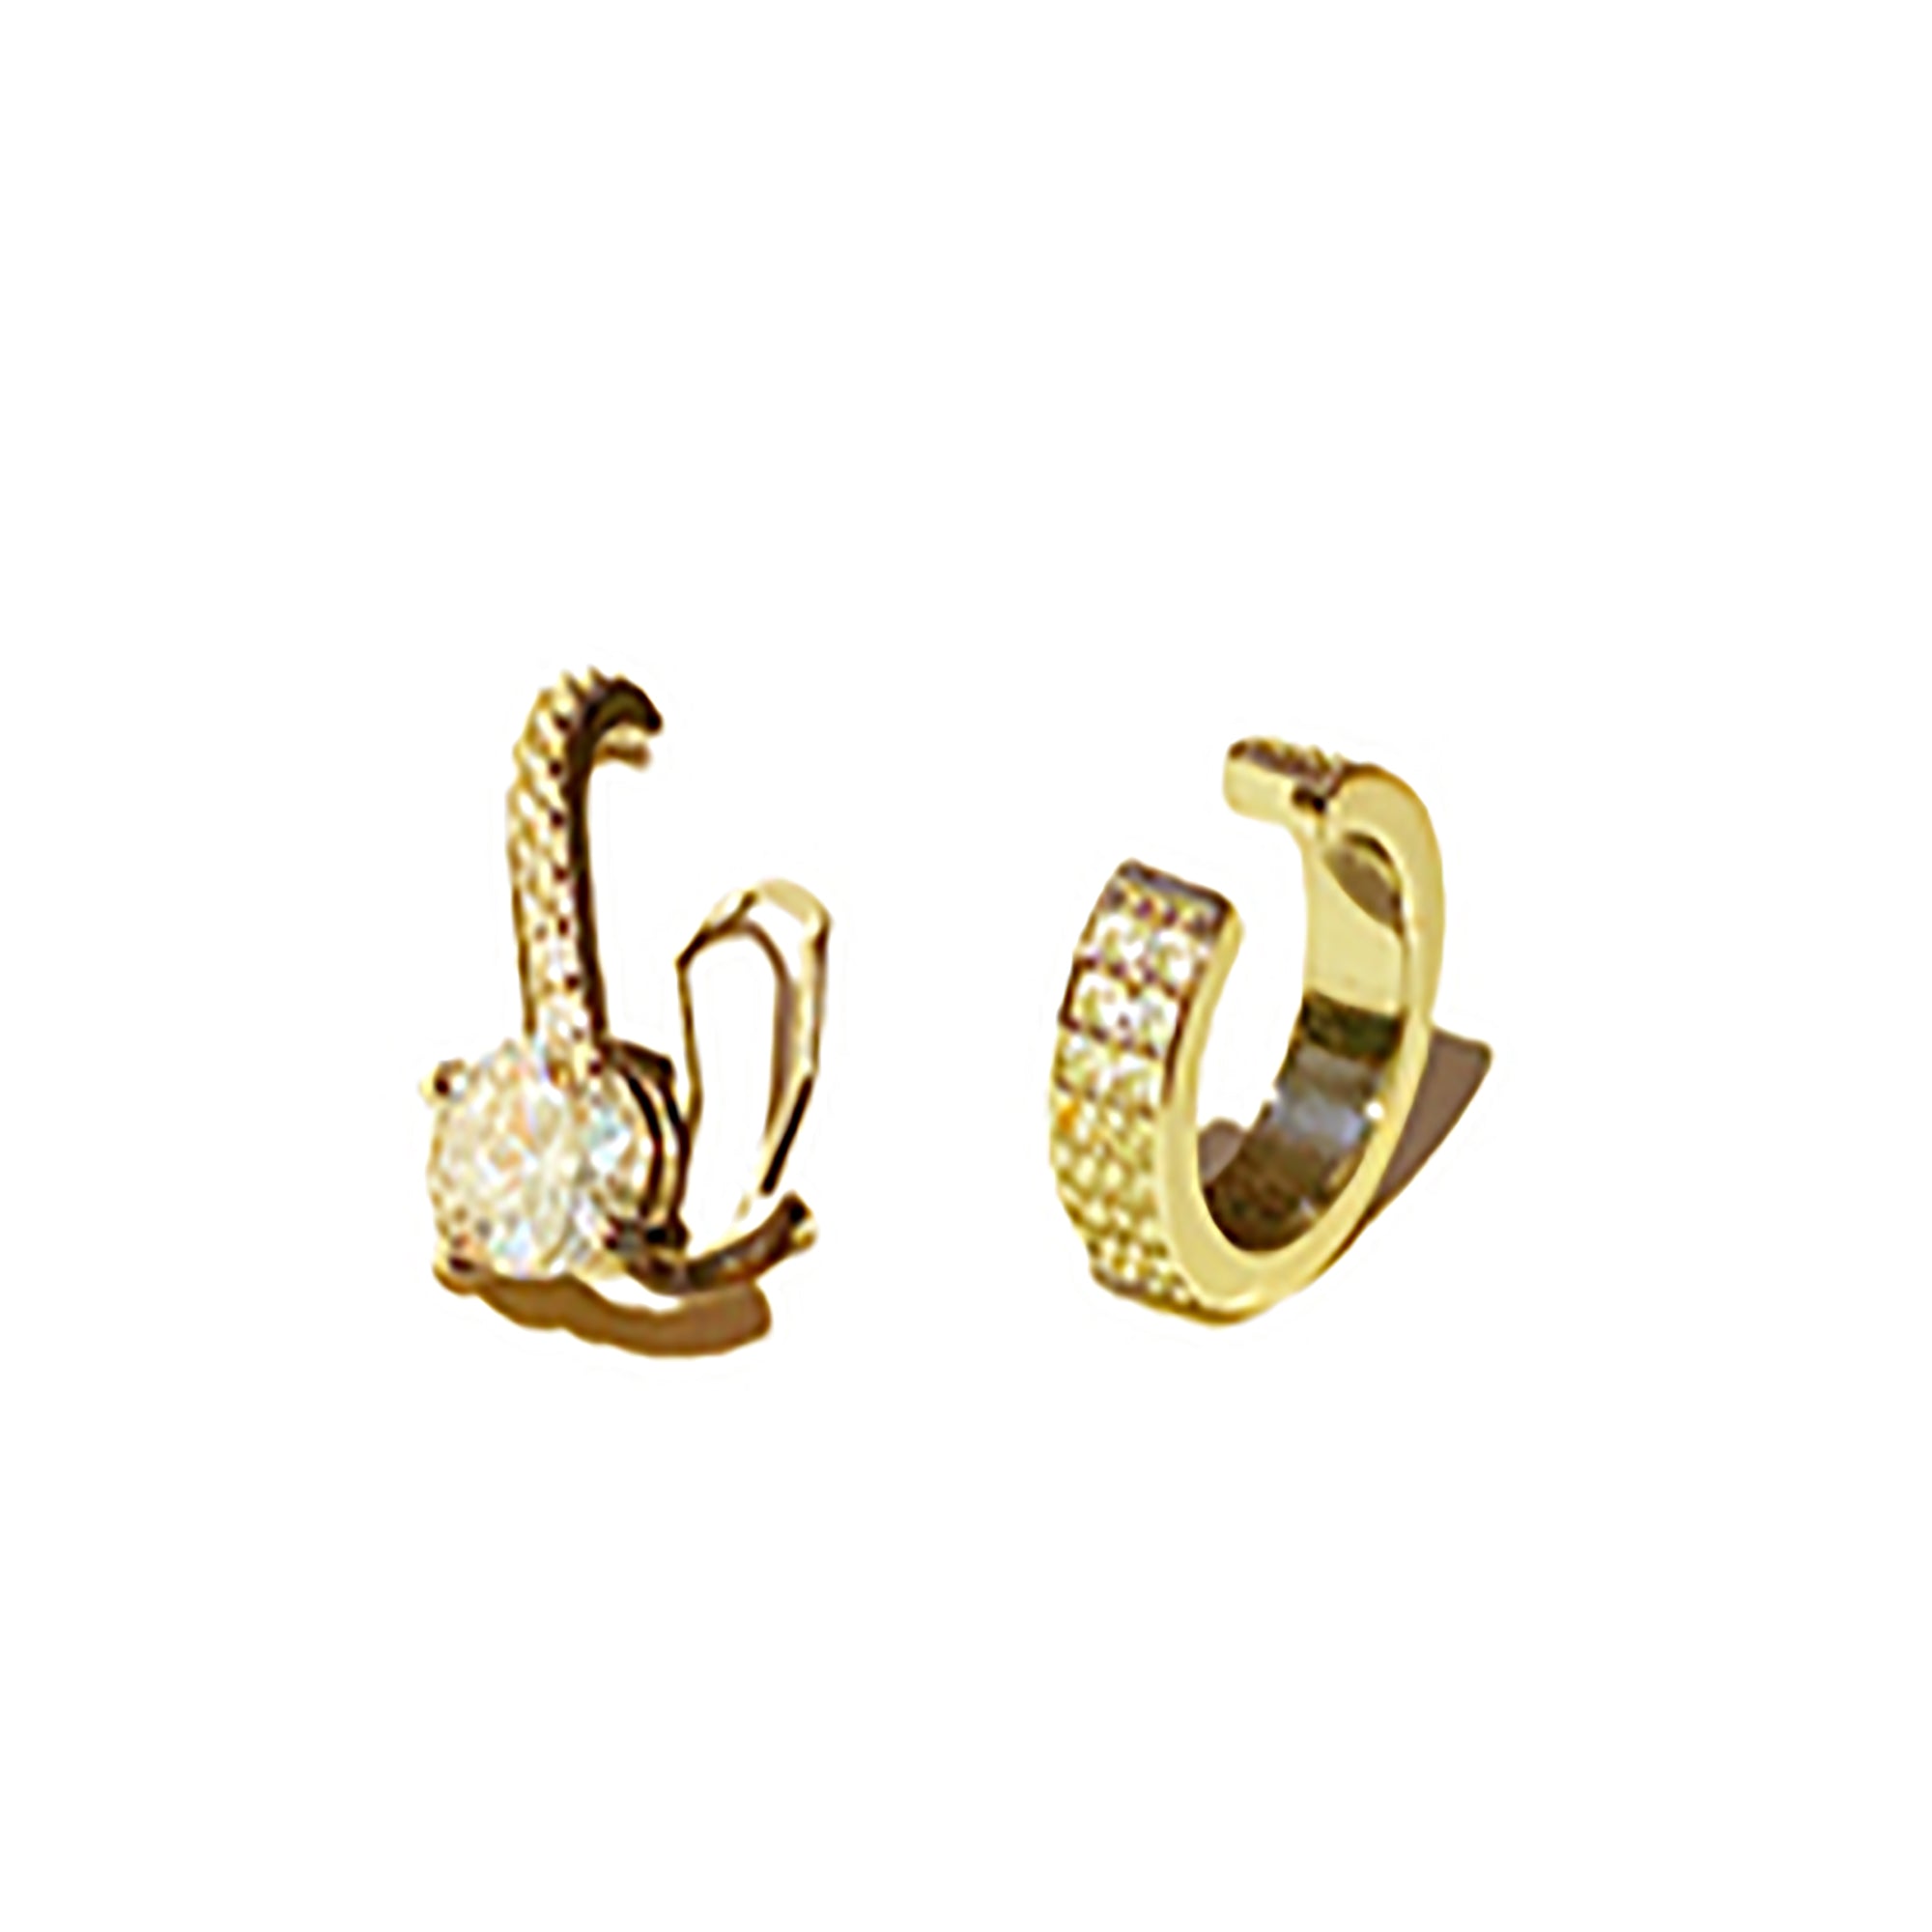 Asymmetrical Gold Plated CZ Ear Cuff Clip Earrings Valentine Day Gift Mother's Day